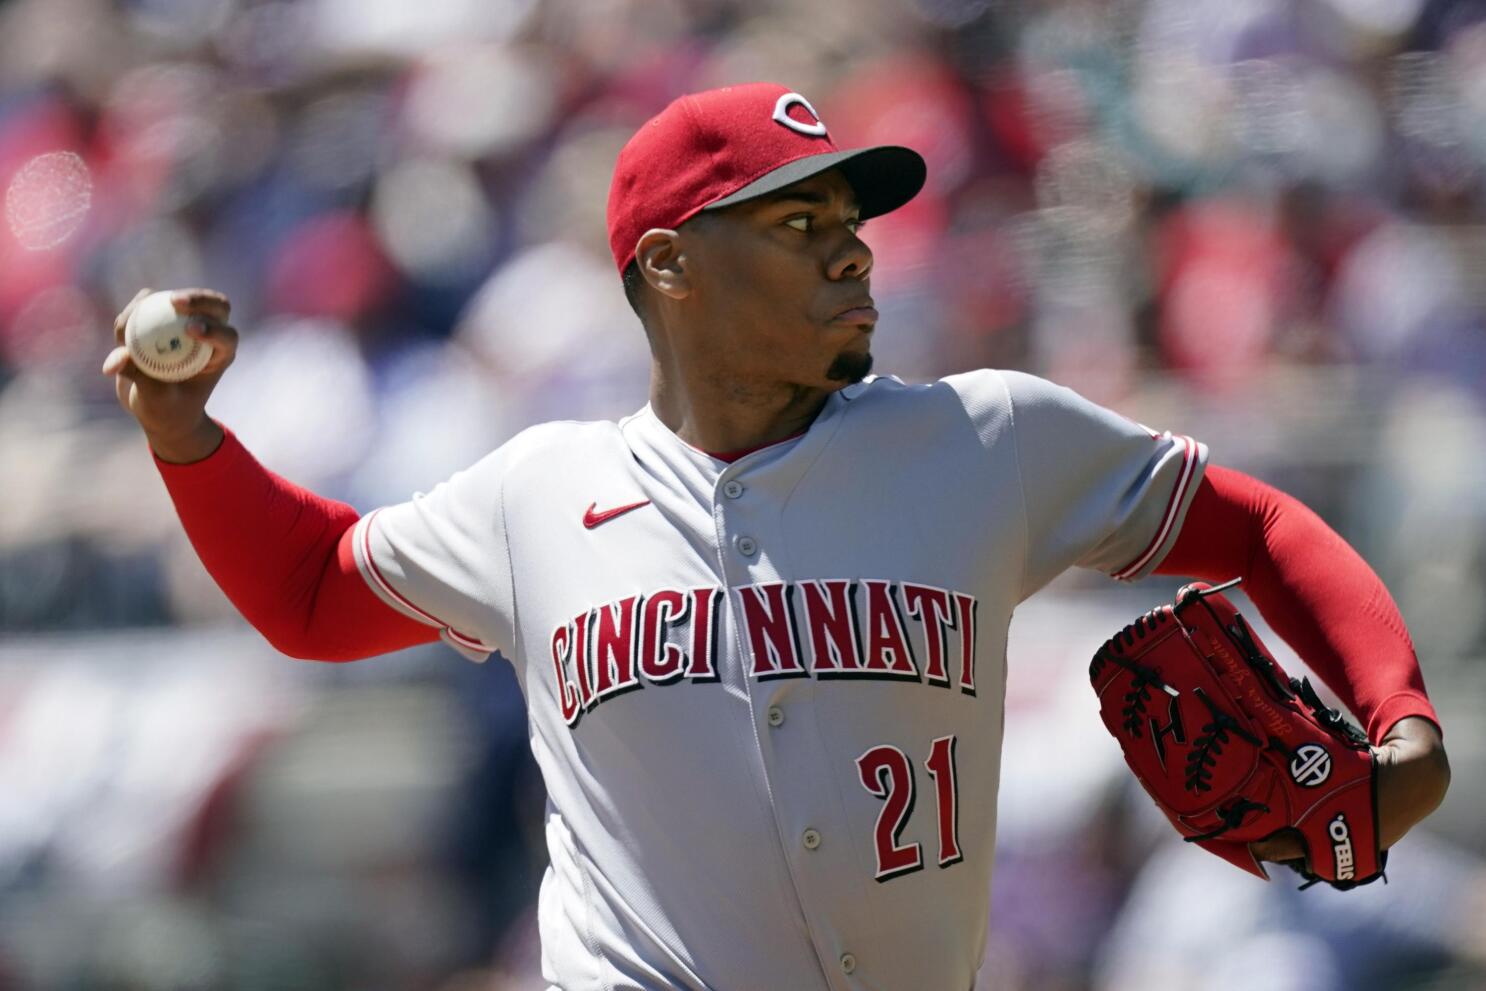 Reds pitcher first to achieve feat in over 100 years of MLB